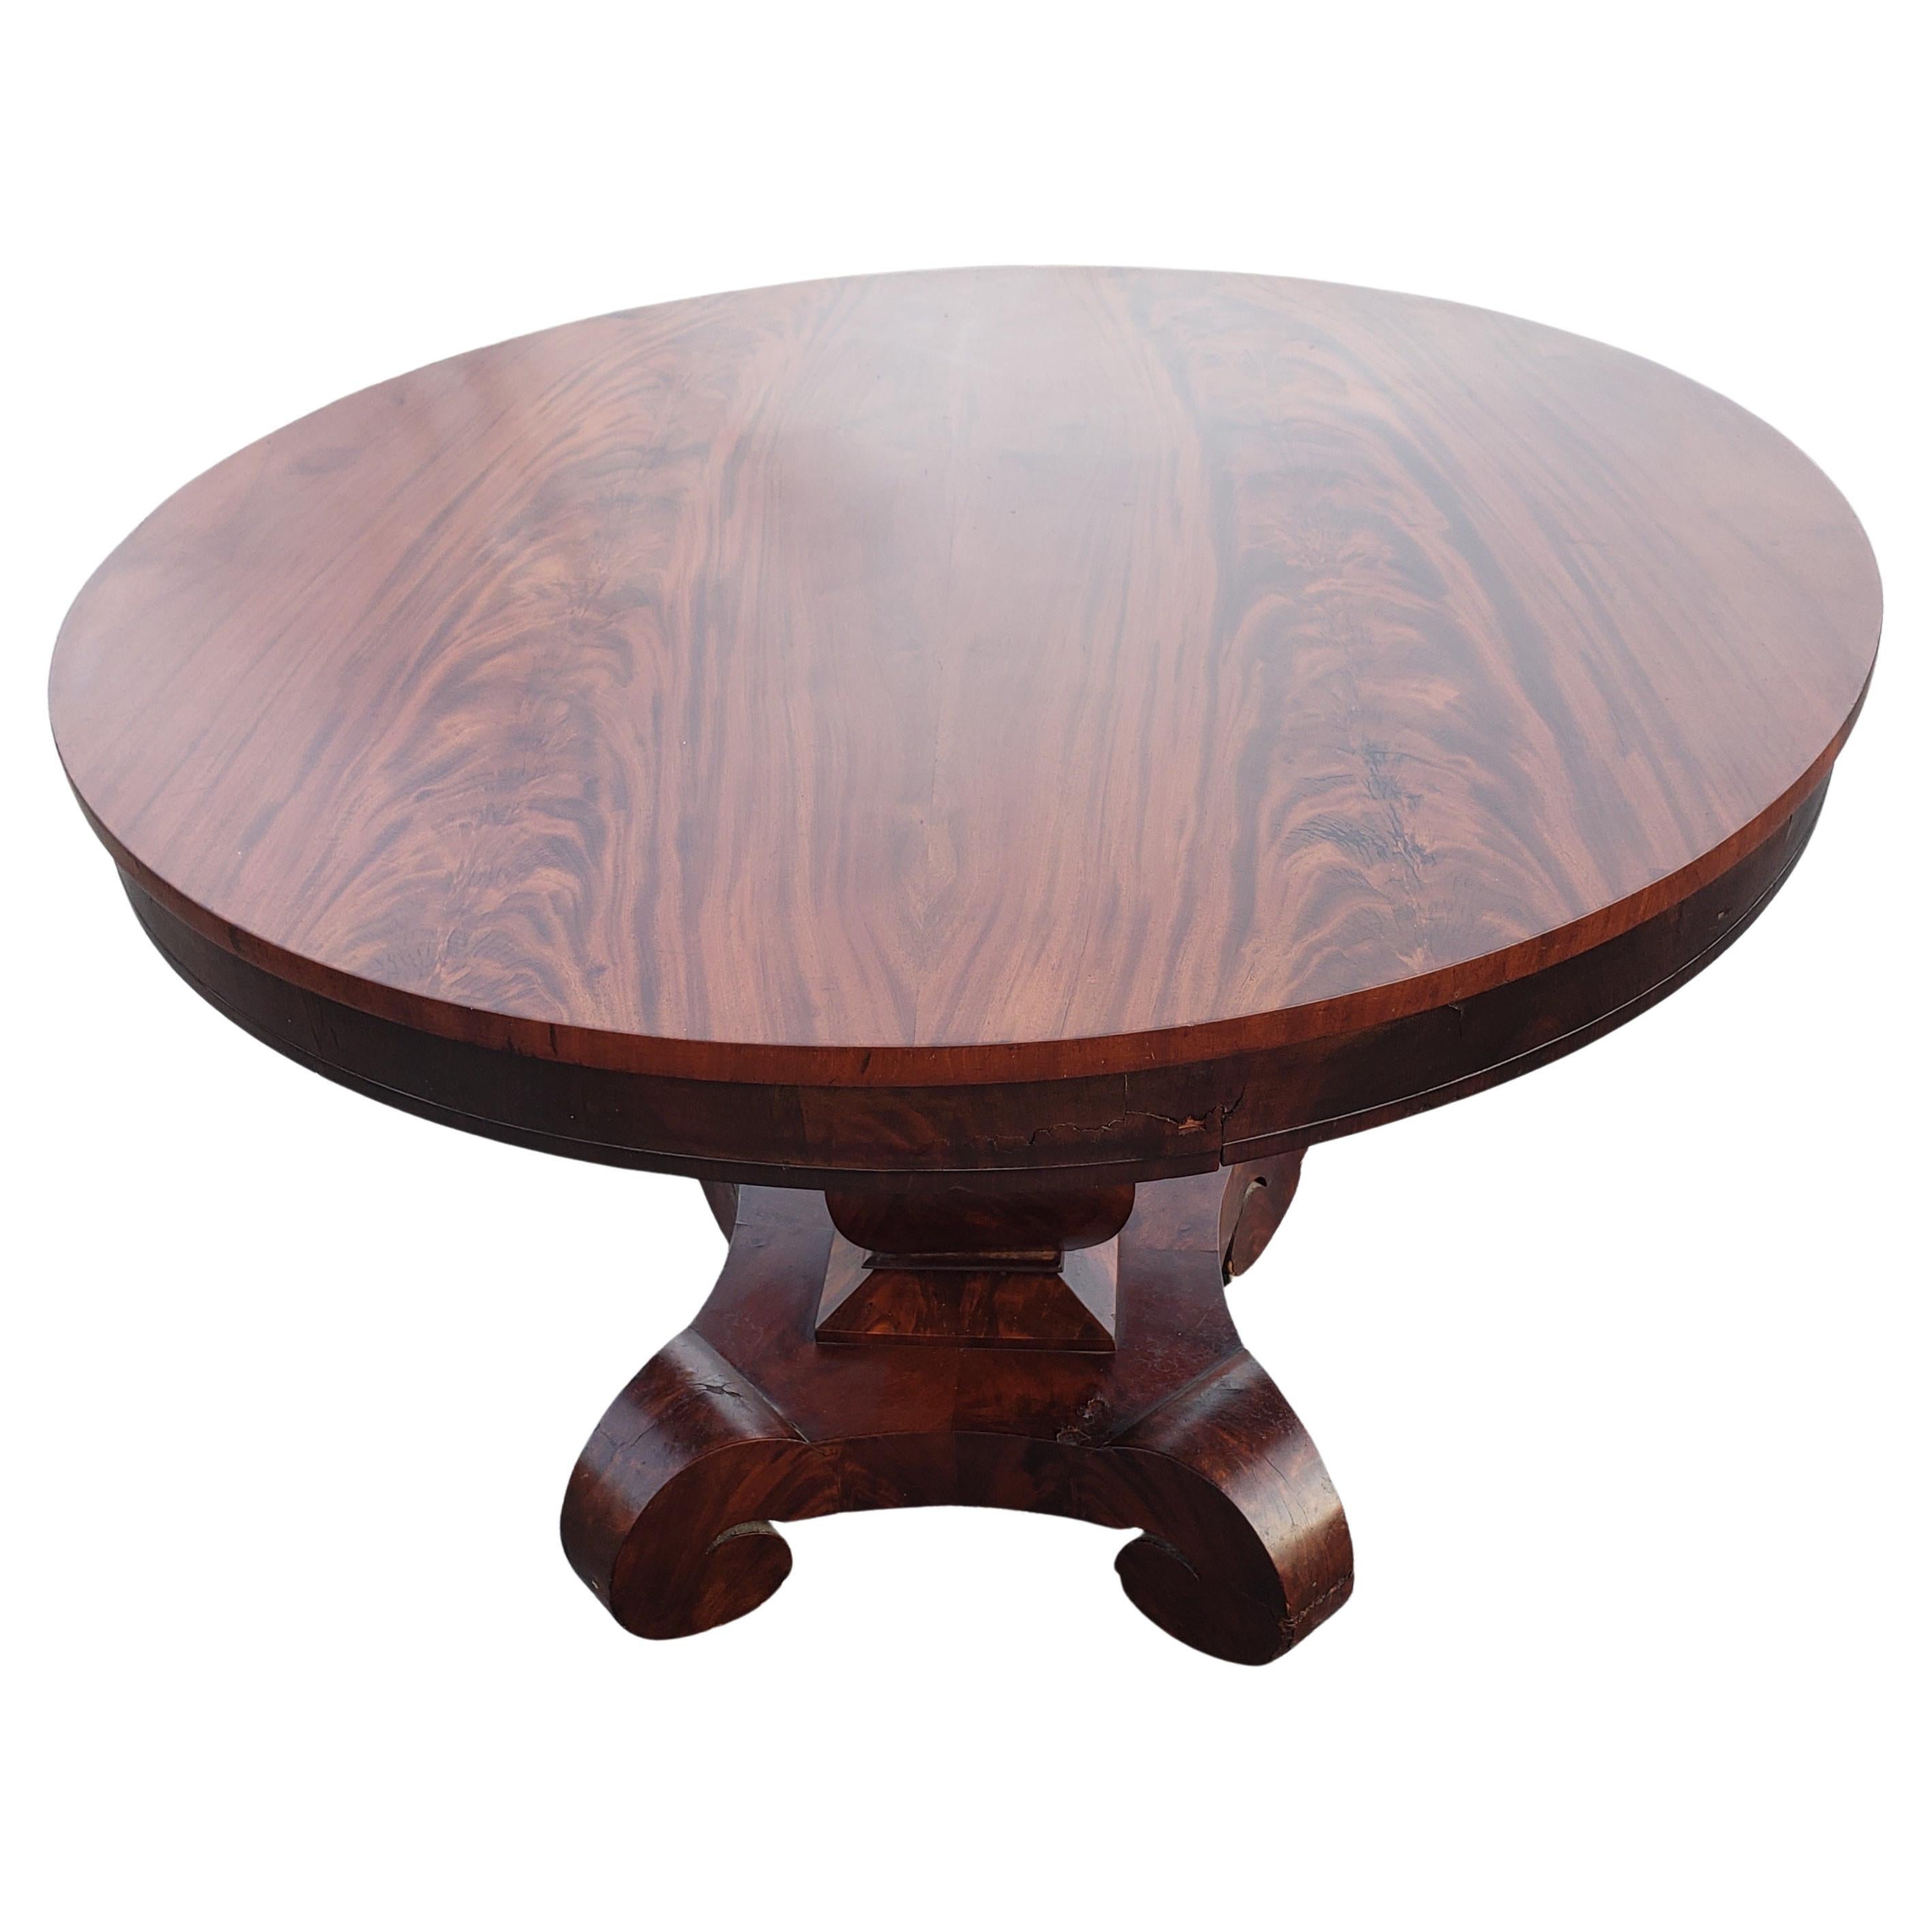 We are pleased to offer this gorgeous Antique American Empire center table, from the 1840s .
This Table is made of Mahogany wood, featuring round flame Mahogany Veneer top , and supported by sturdy column ending with 4 legs on origianal